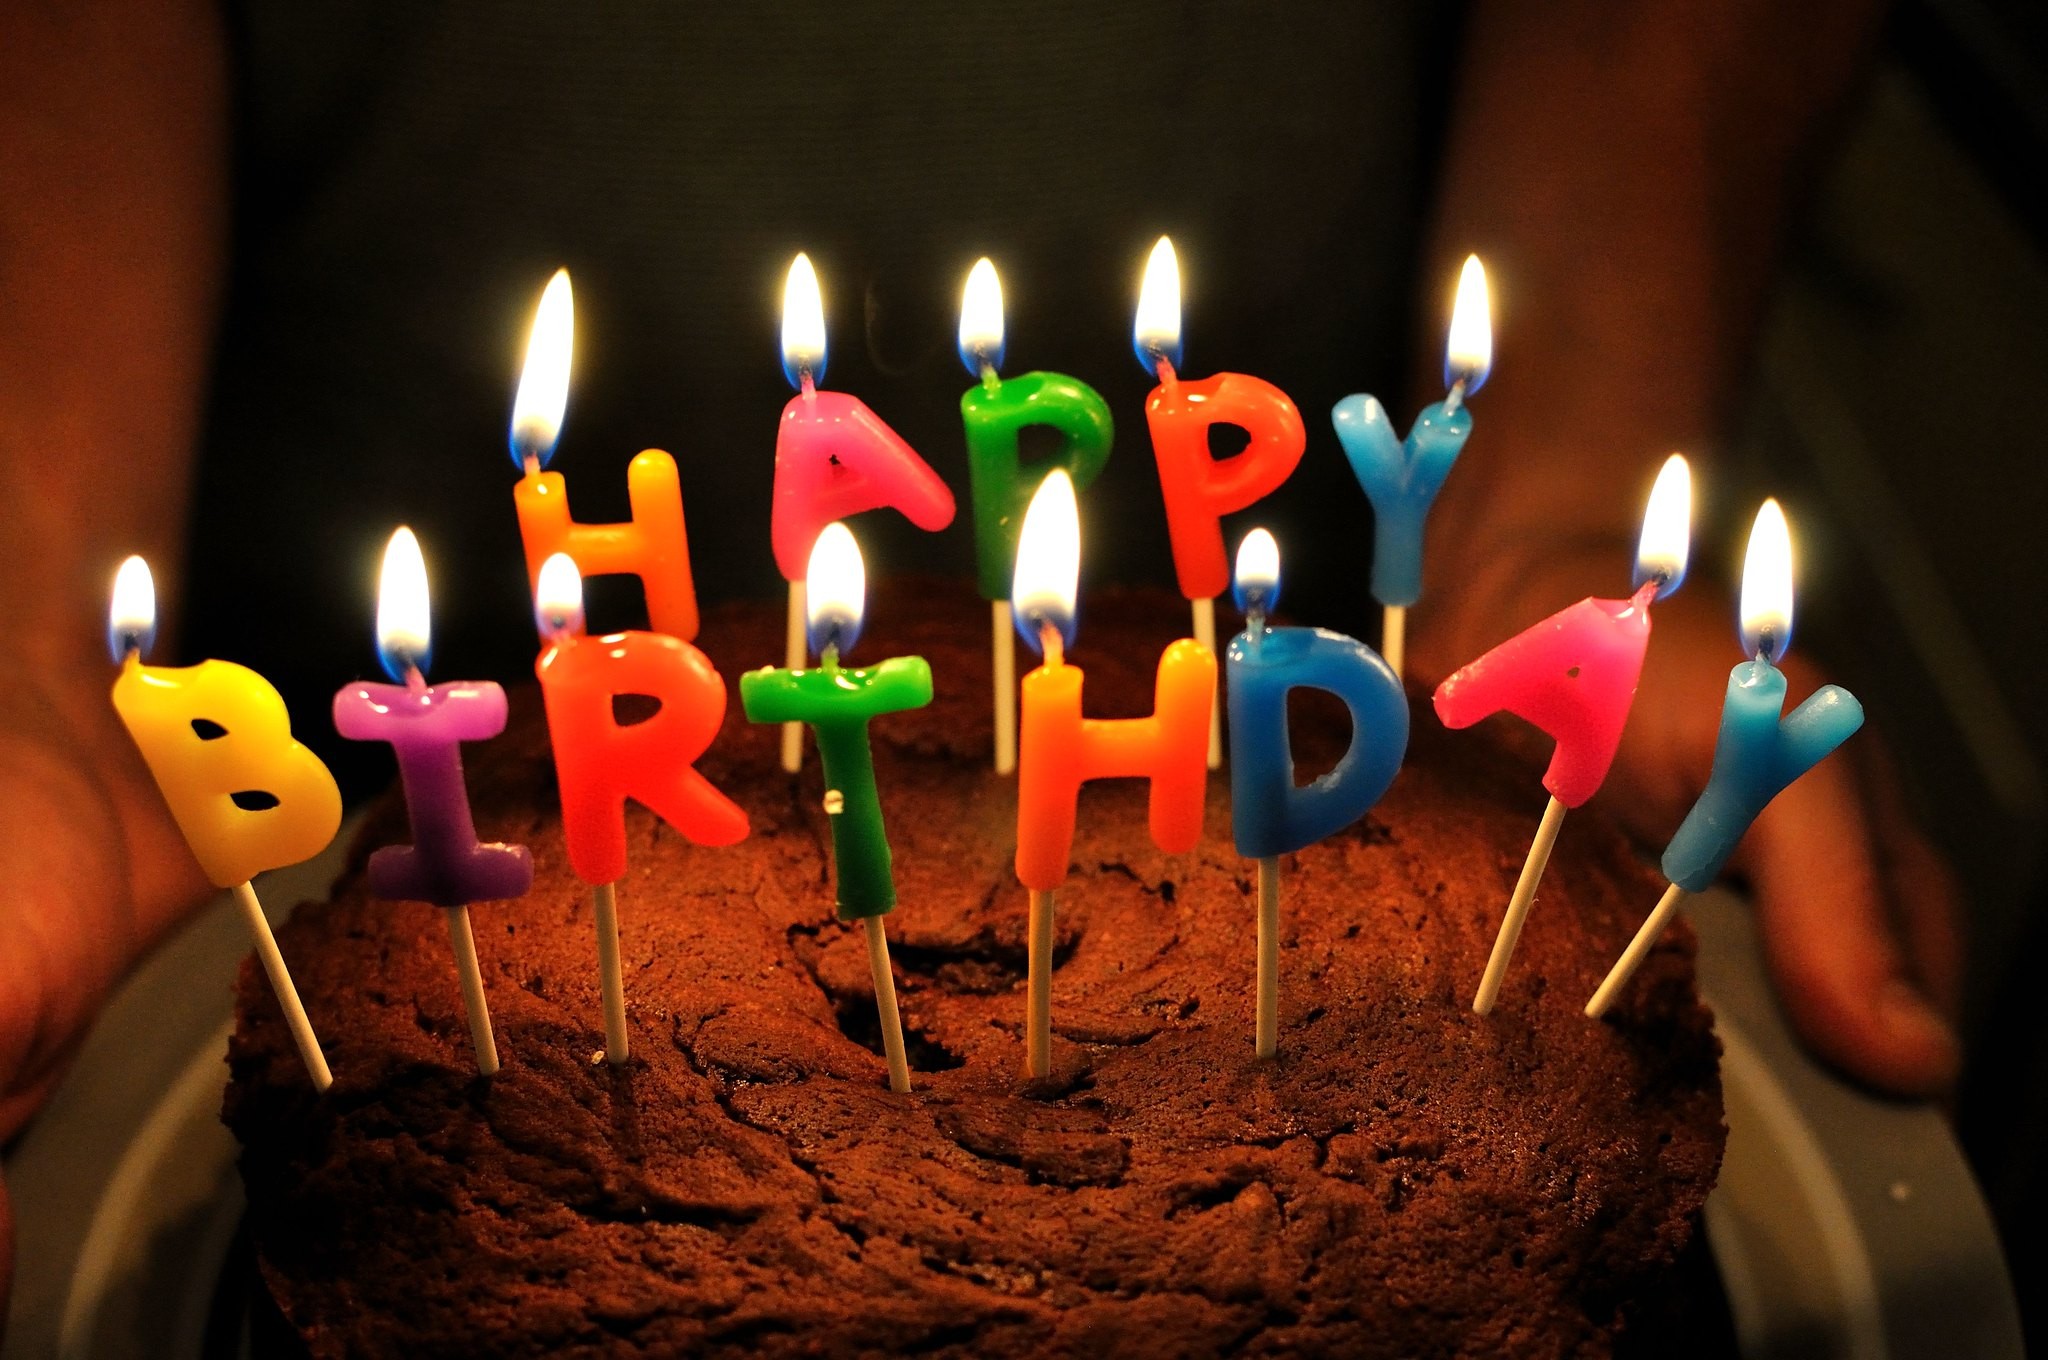 This visual is about birthday happy cake candles freetoedit #birthday #happ...